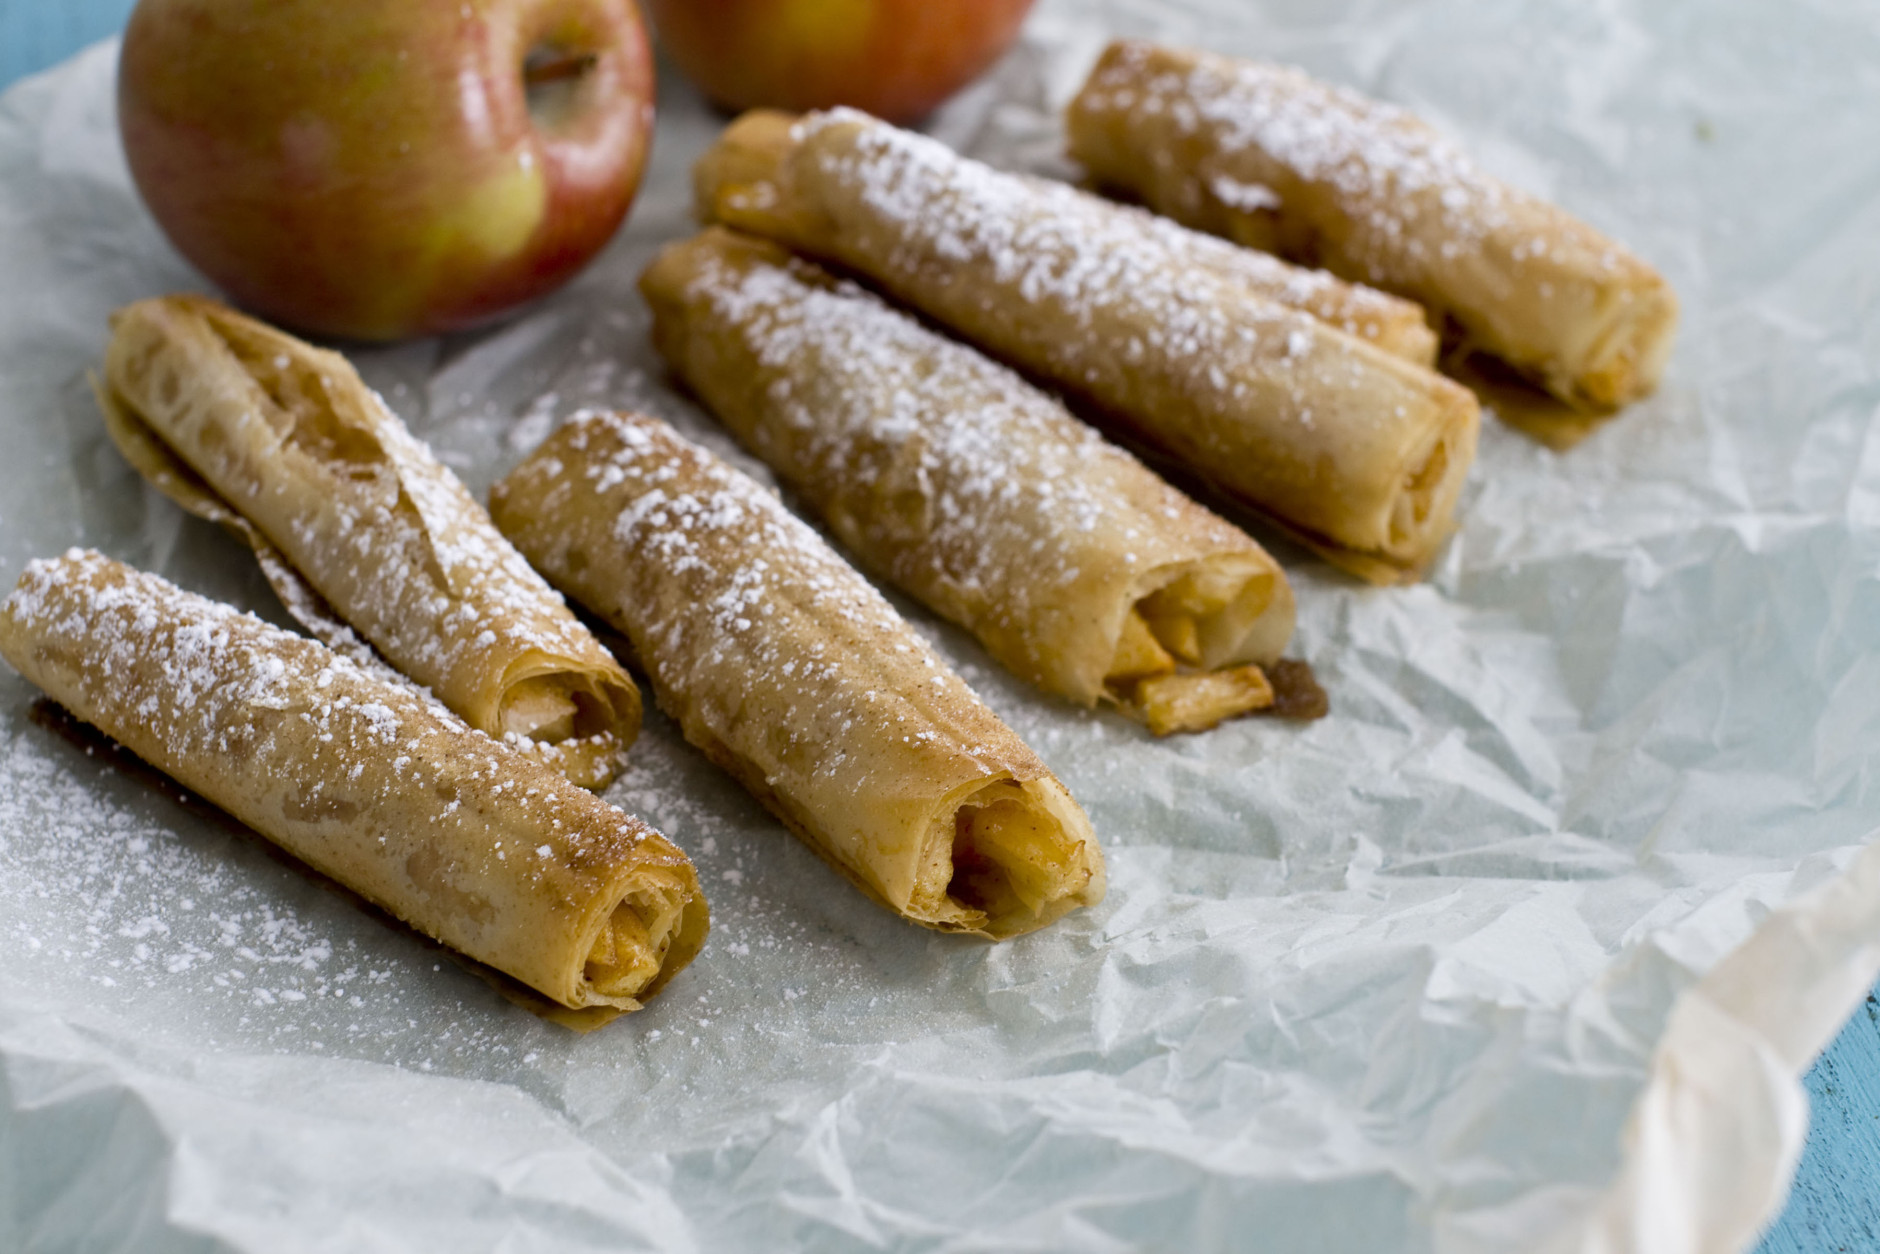 This  image taken on June 5, 2012 shows apple phyllo cigars in Concord, N.H. (AP Photo/Matthew Mead)